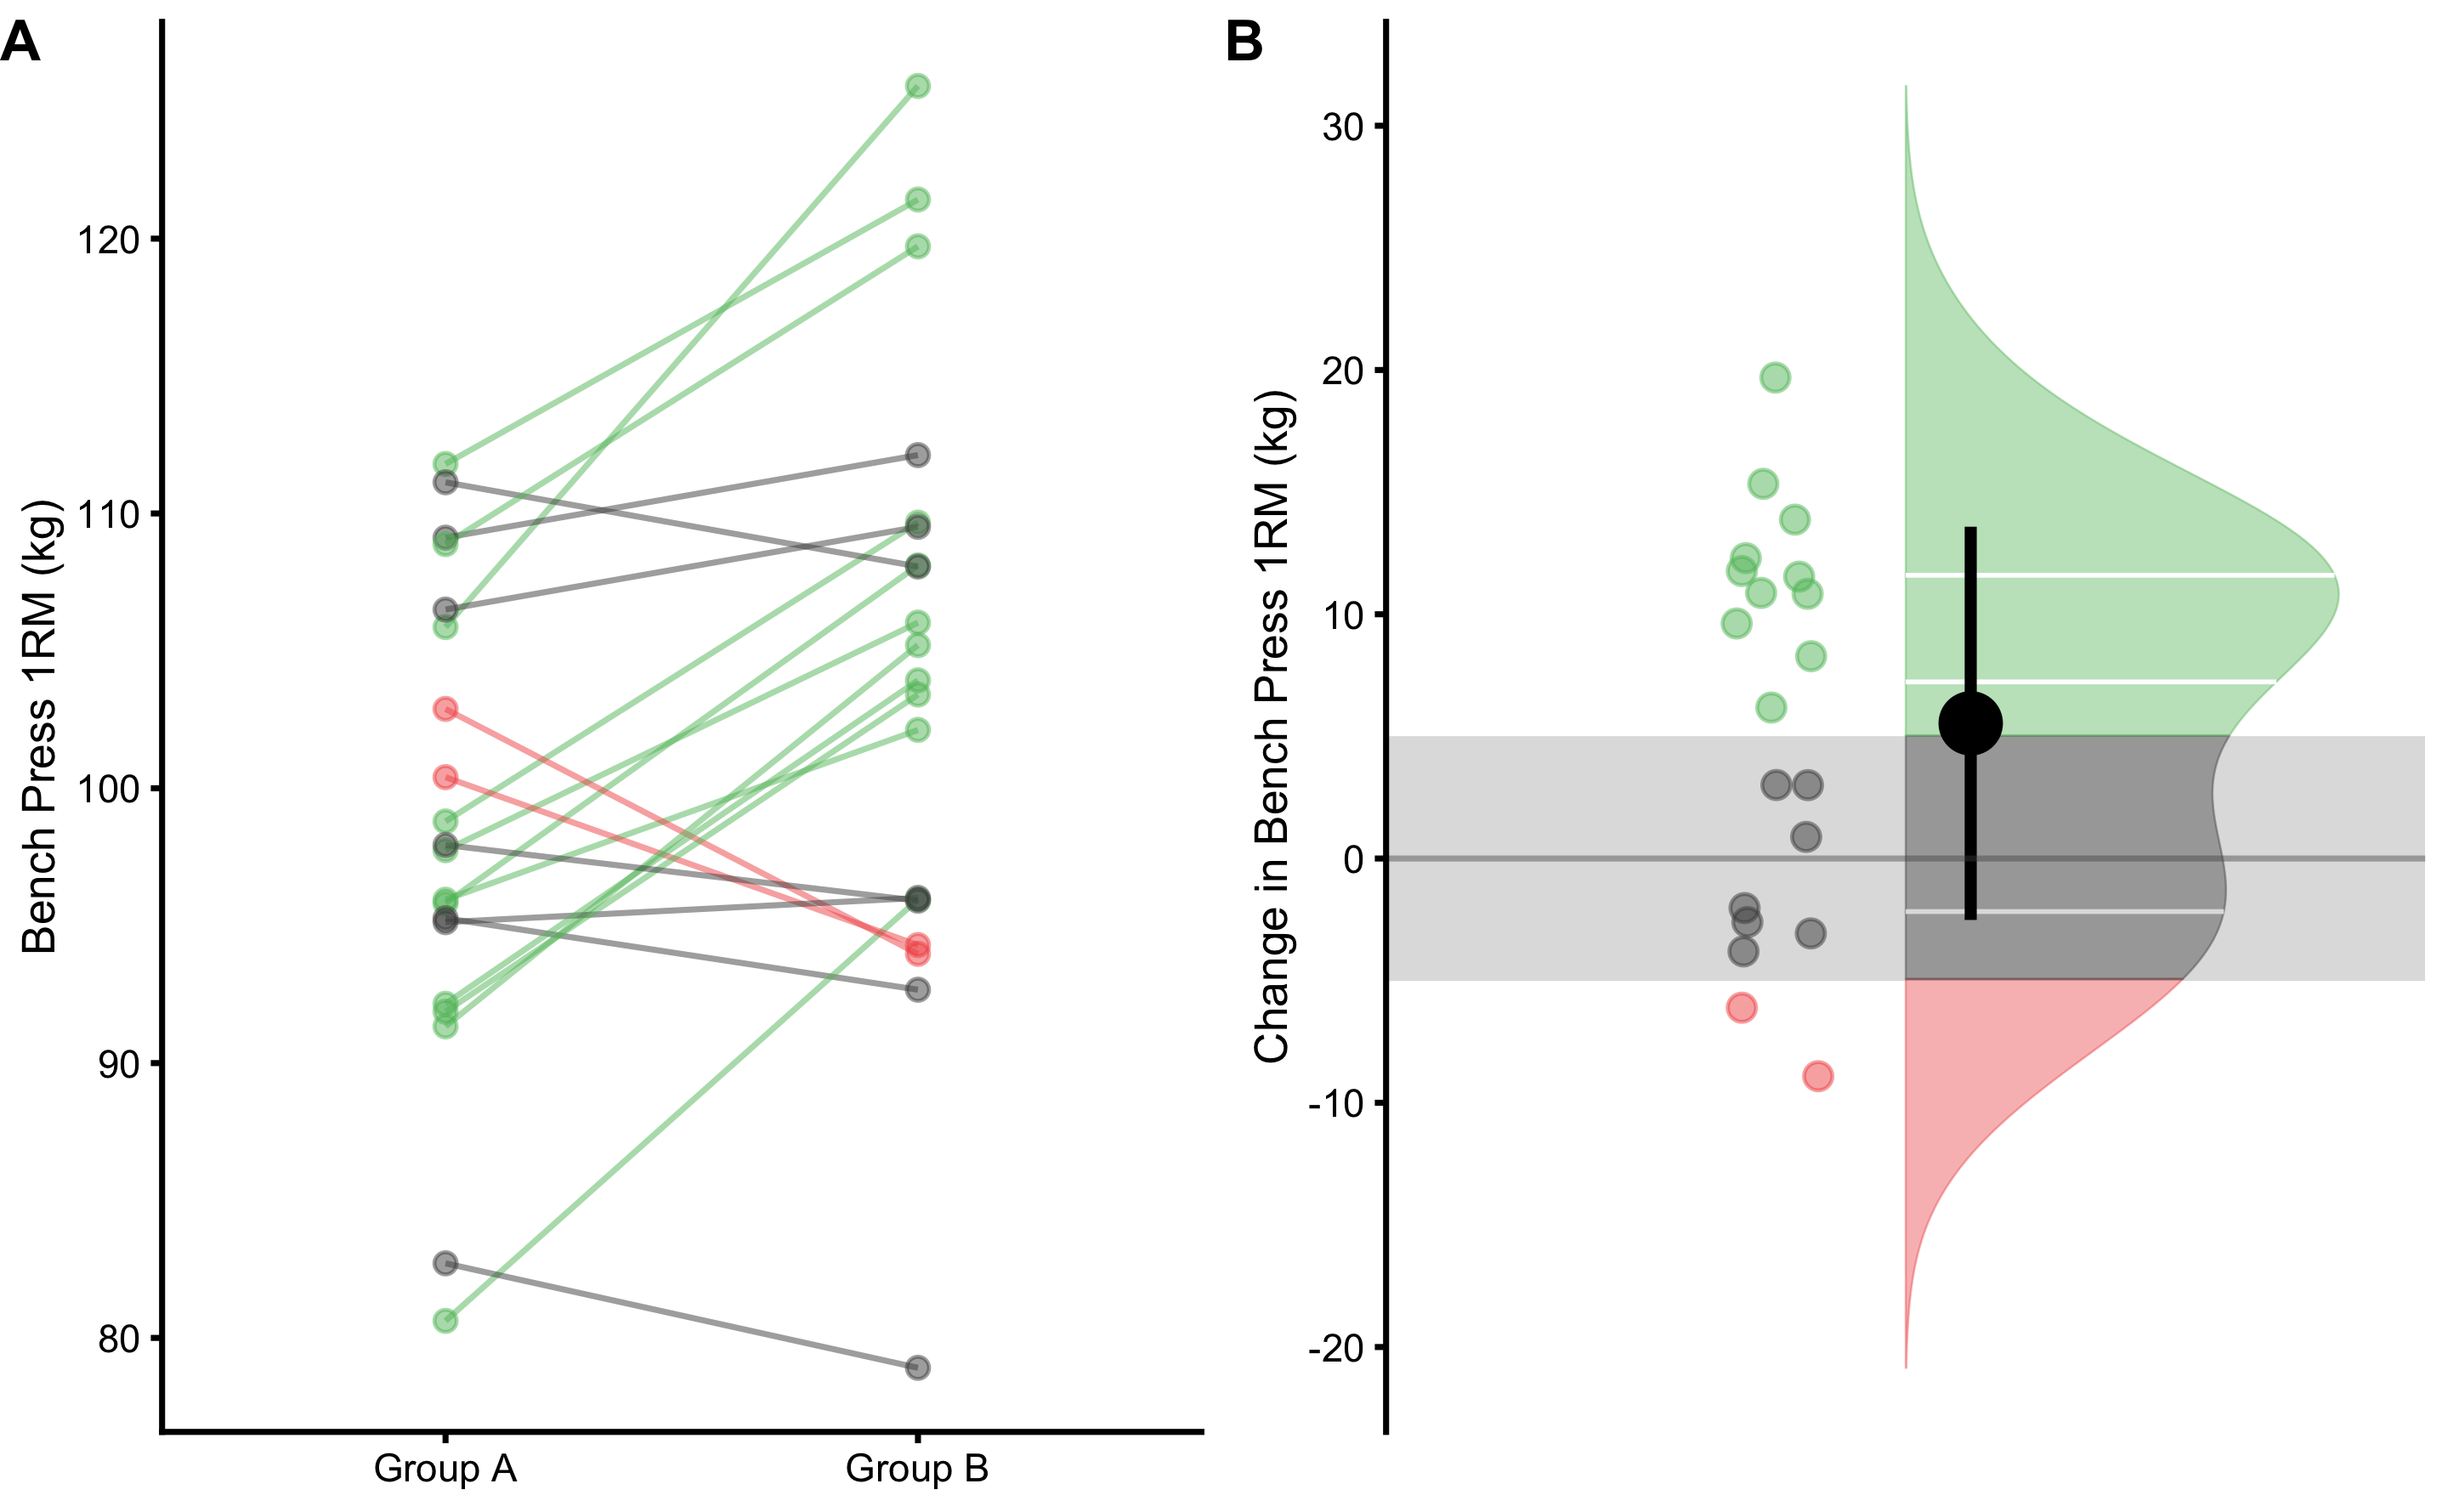 Visual analysis of the dependent groups scores using SESOI. A. Scatter plot of Pre-test and Post-test scores. Green line indicates change higher than SESOI upper, grey line indicates change within SESOI band, and red line indicates negative change lower than SESOI lower. B. Distribution of the change scores. Green area represents proportion of change scores higher than SESOI upper, red area represents proportion of negative change scores lower than SESOI lower, and grey area indicates equivalent change, which is within SESOI band